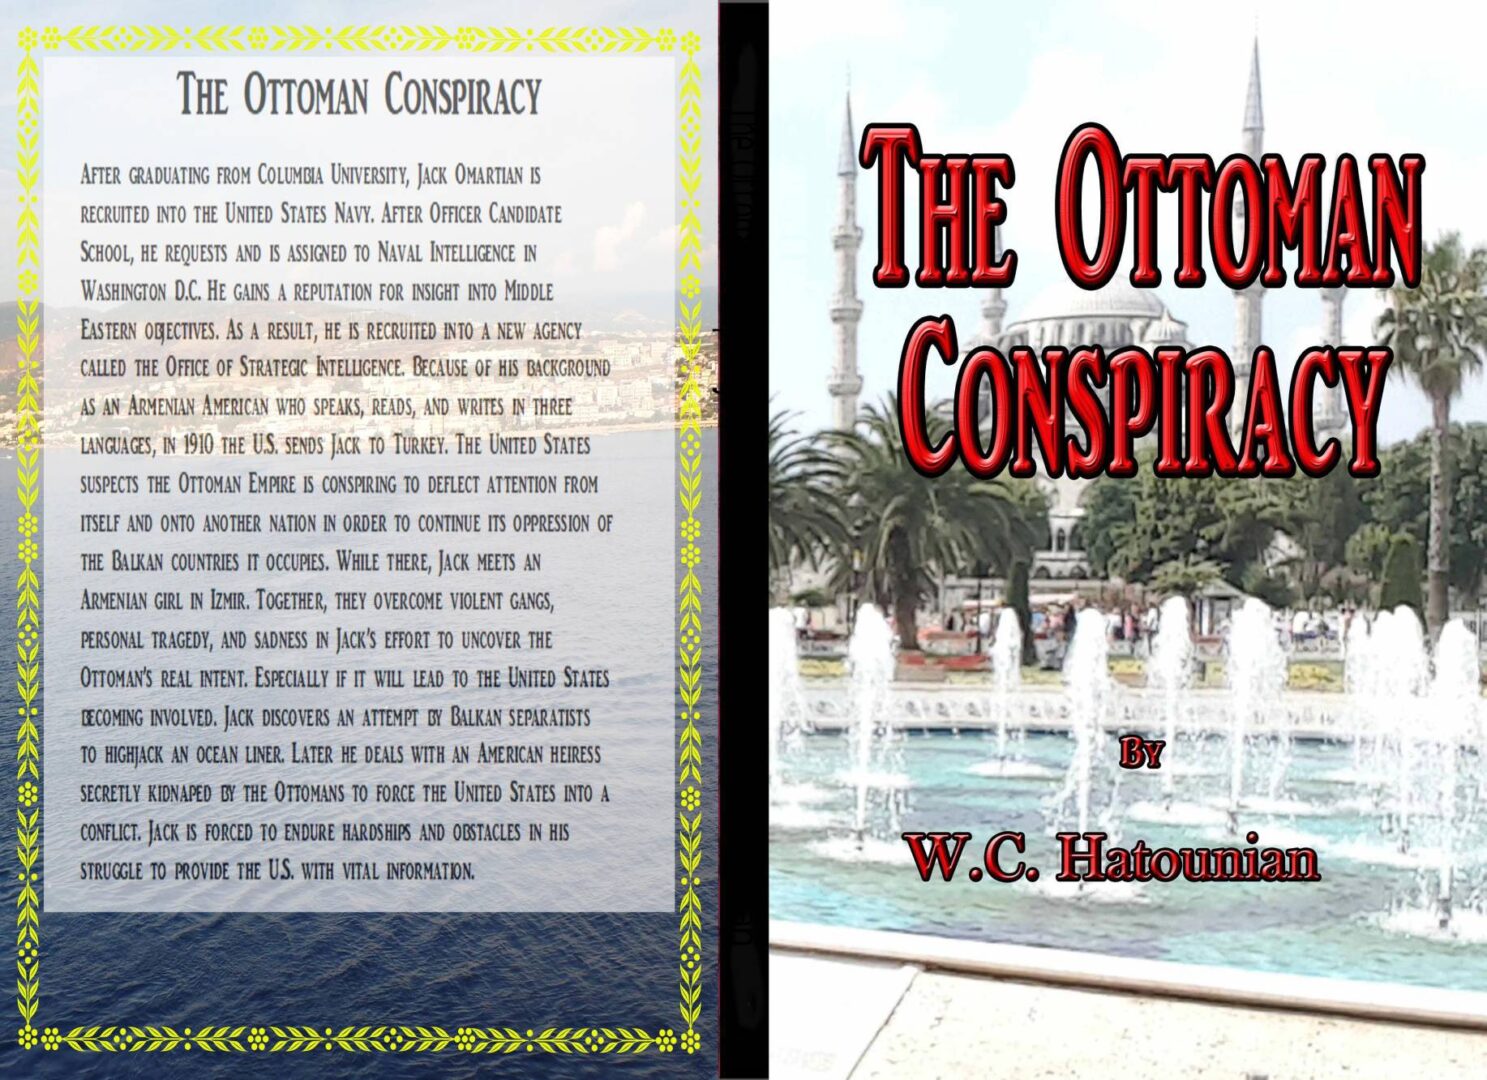 A cover page of the book the ottoman conspiracy by W.C. Hatounian